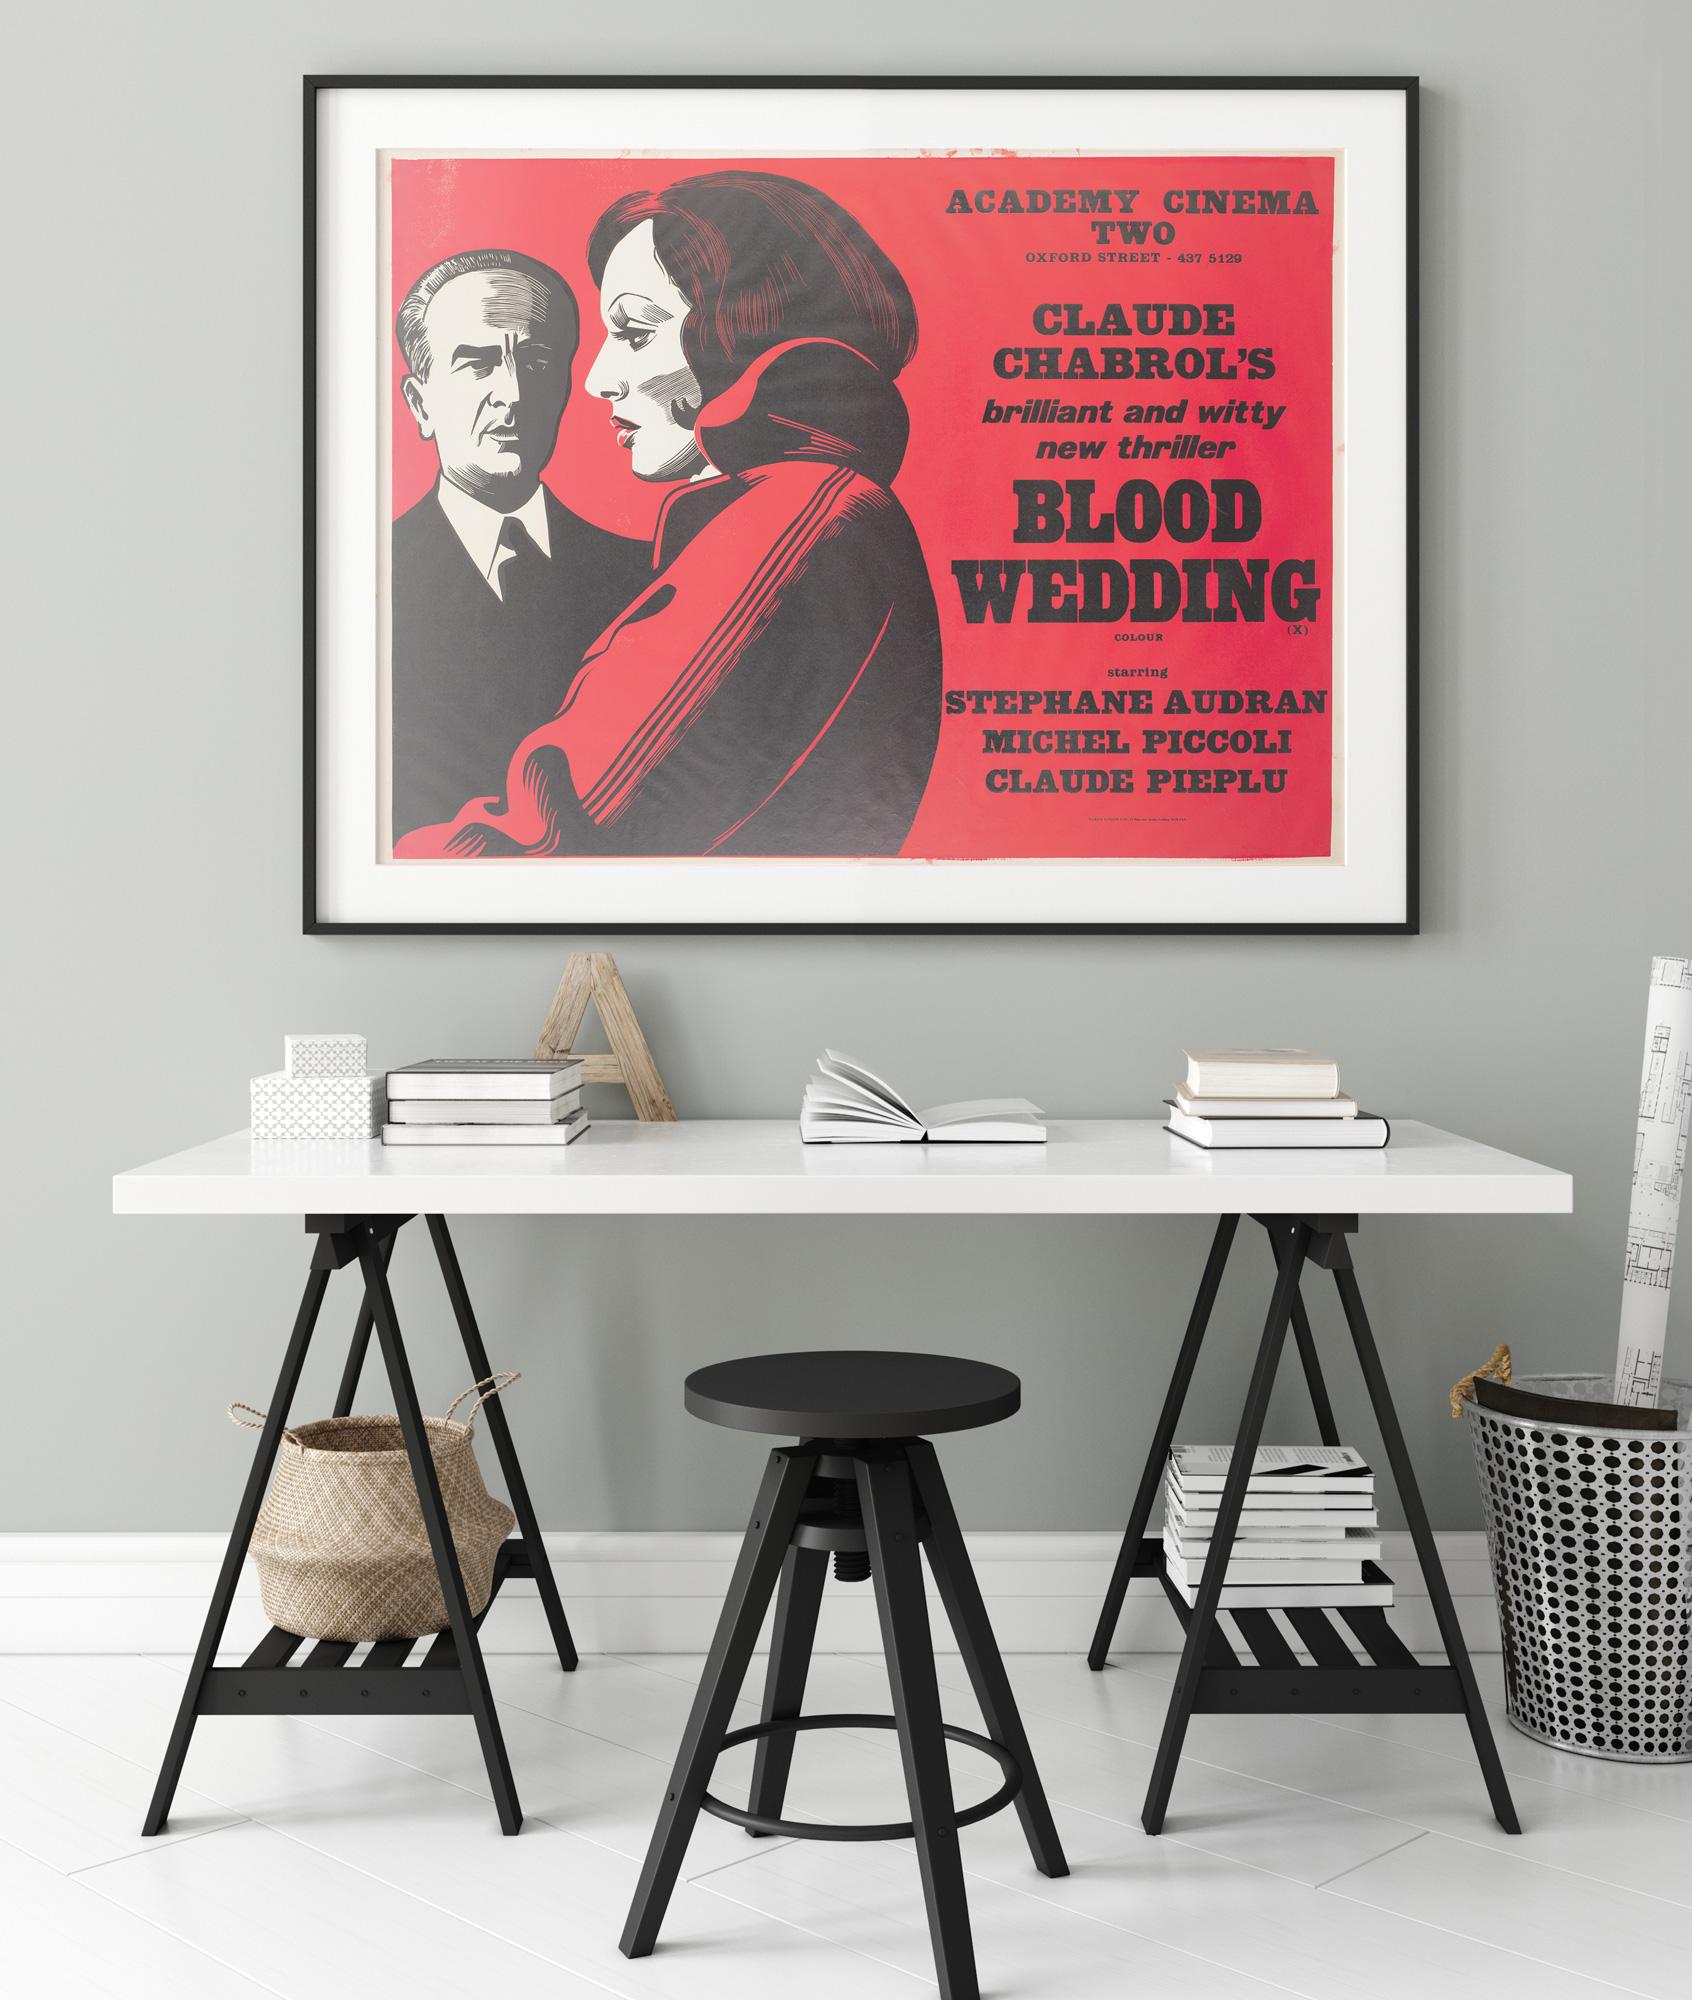 A wonderfully deep, broody and sumptuous blood-red design by Peter Strausfeld features on the Academy Cinema film poster for Claude Chabrol's Les Noces Rouges (Blood Wedding). 

Cologne born Strausfeld came to England in 1938. Whilst interned on